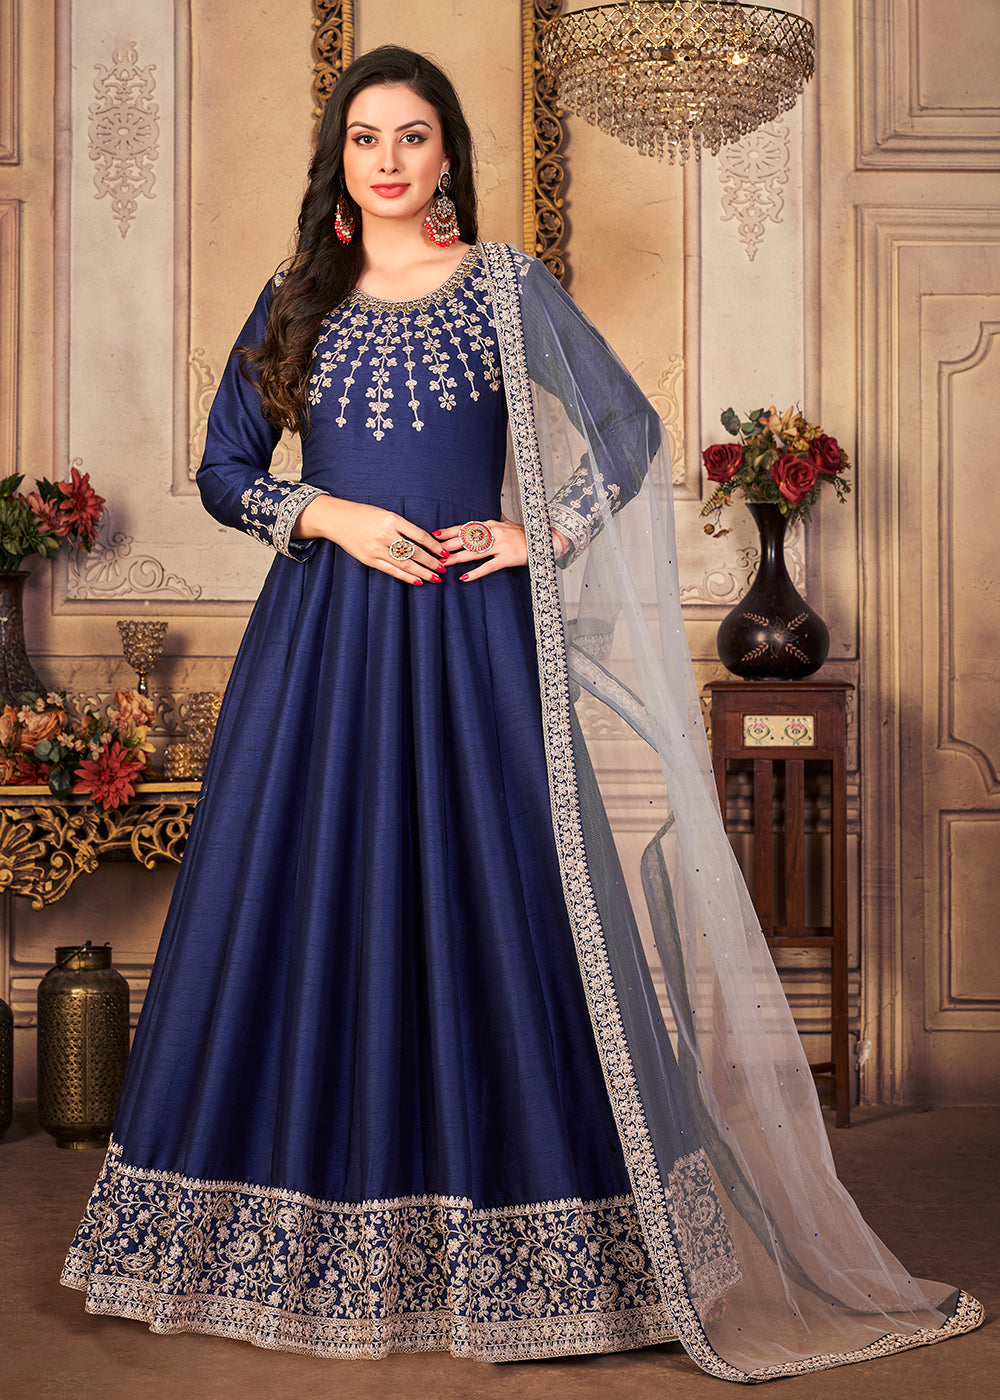 Buy Now Festive Enticing Blue Embroidered Silk Anarkali Suit Online in Canada at Empress Clothing.